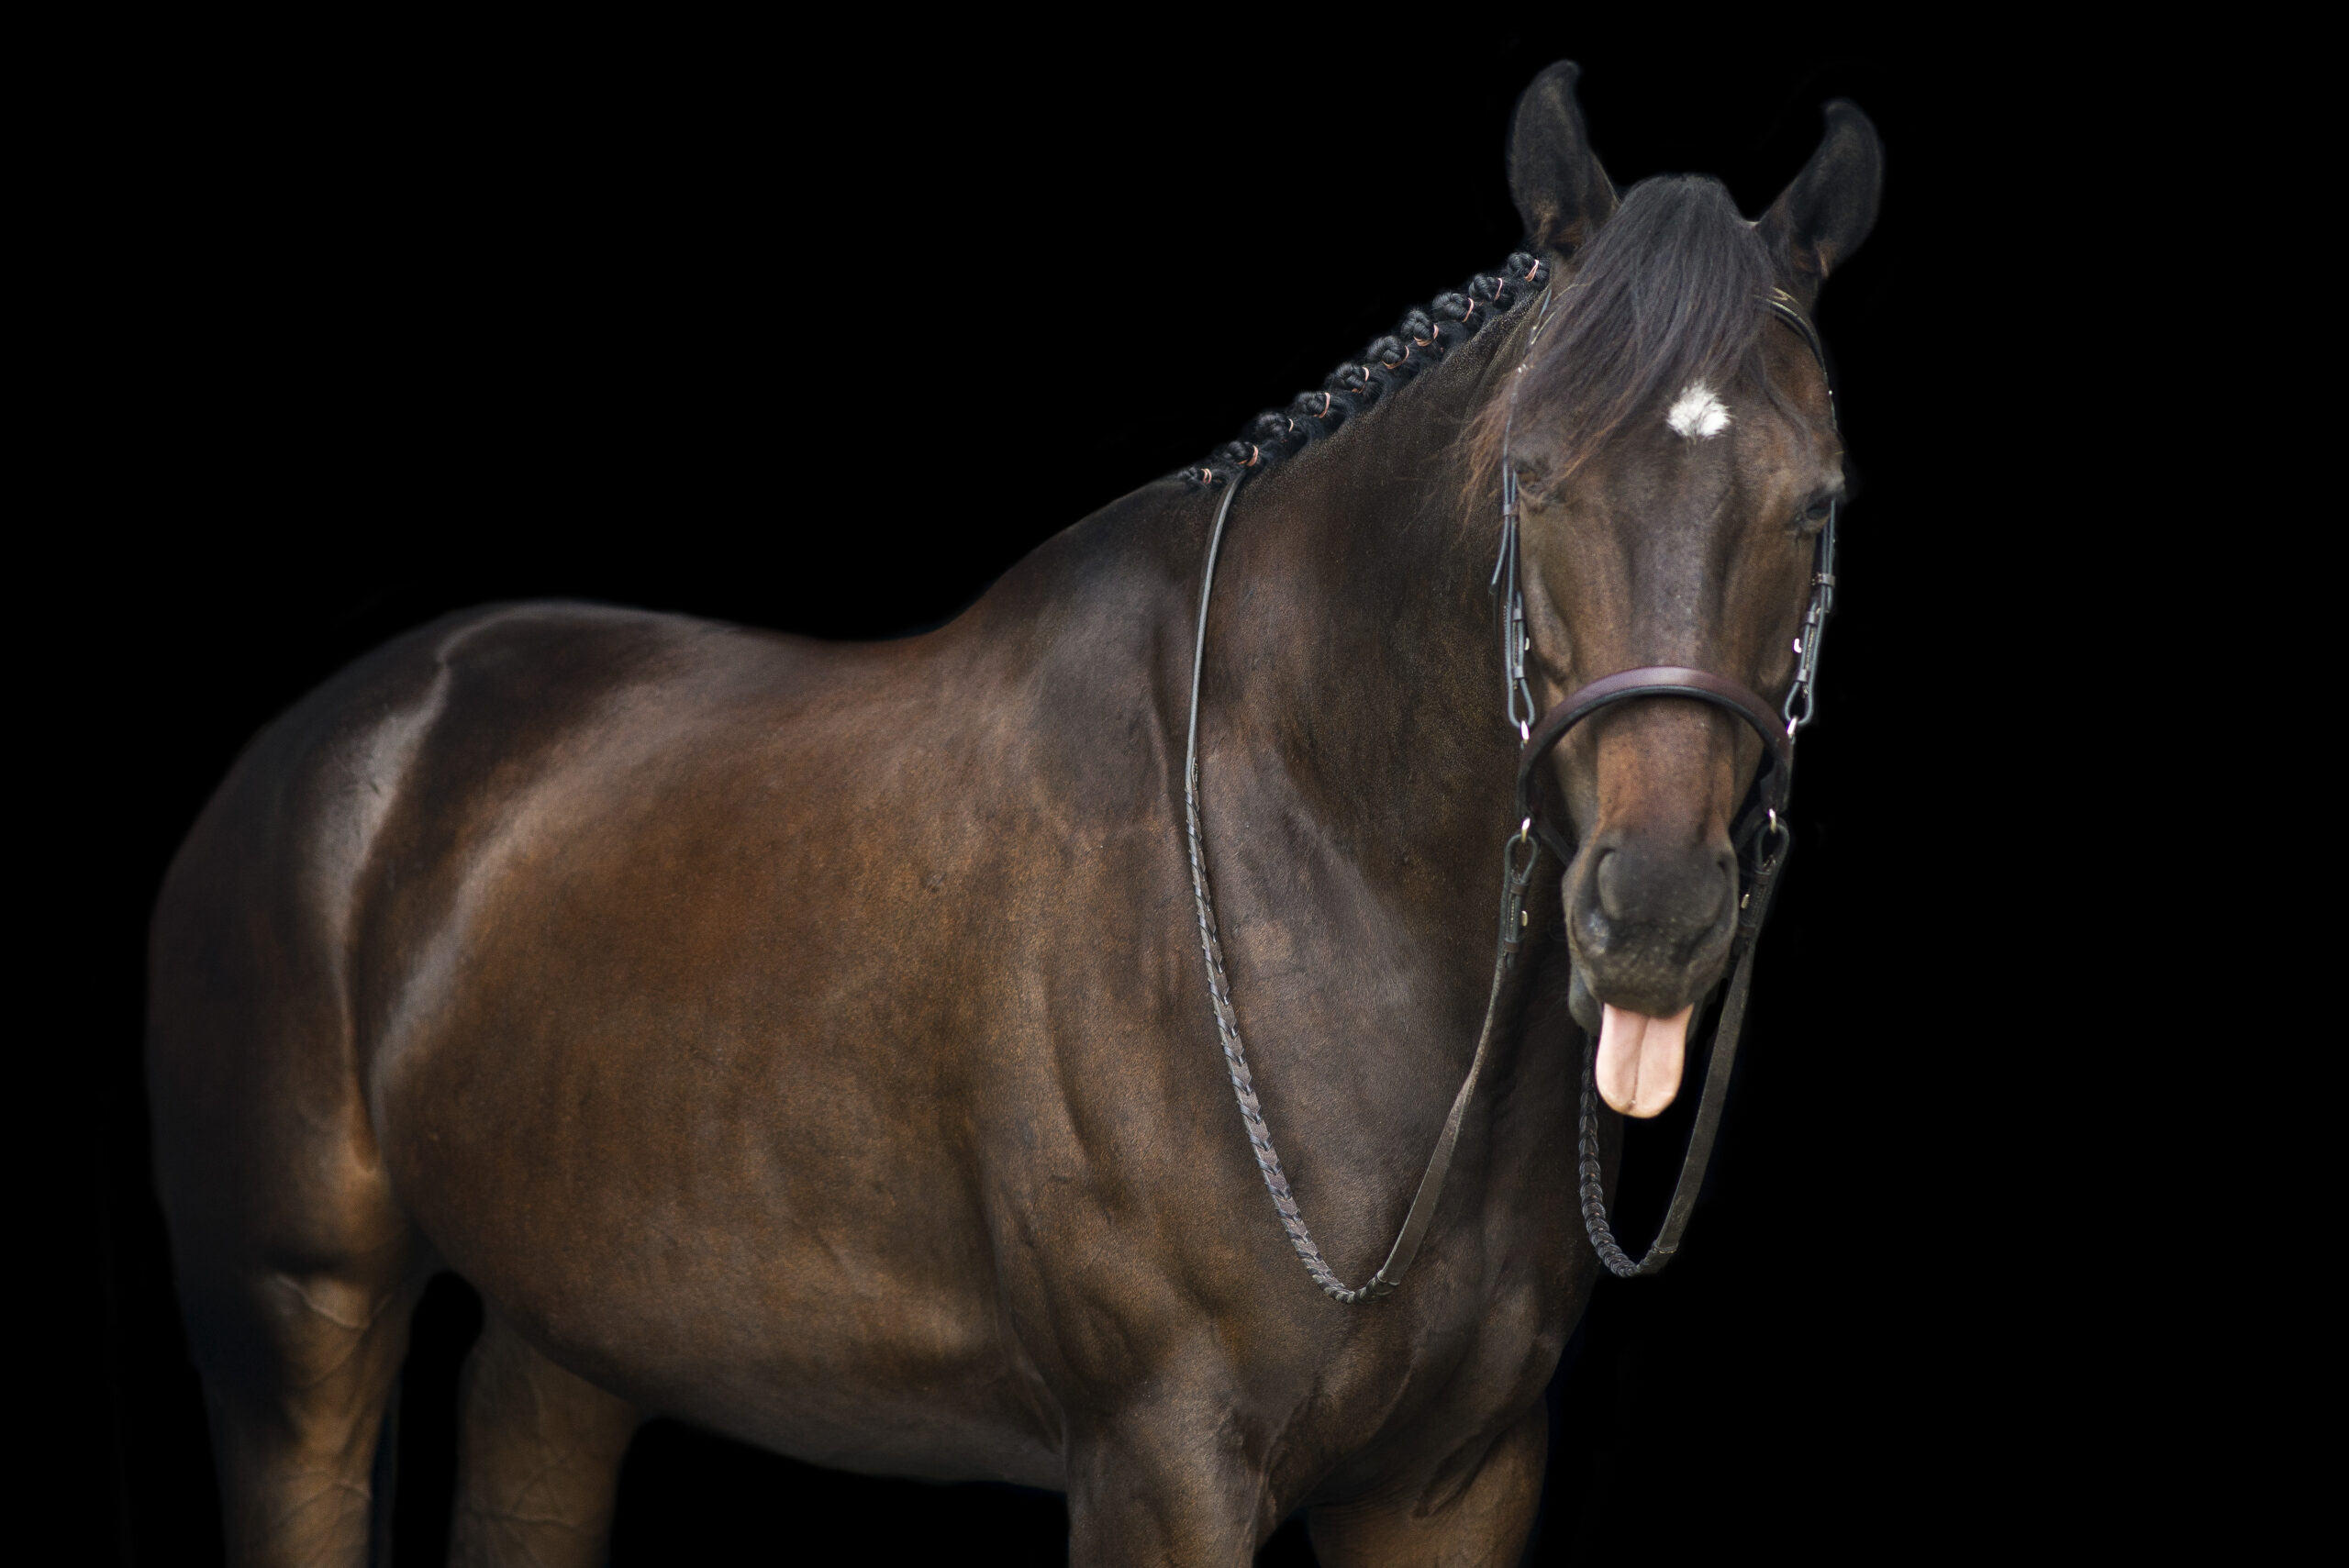 Thoroughbred gelding sticks tongue out for portraits on black background